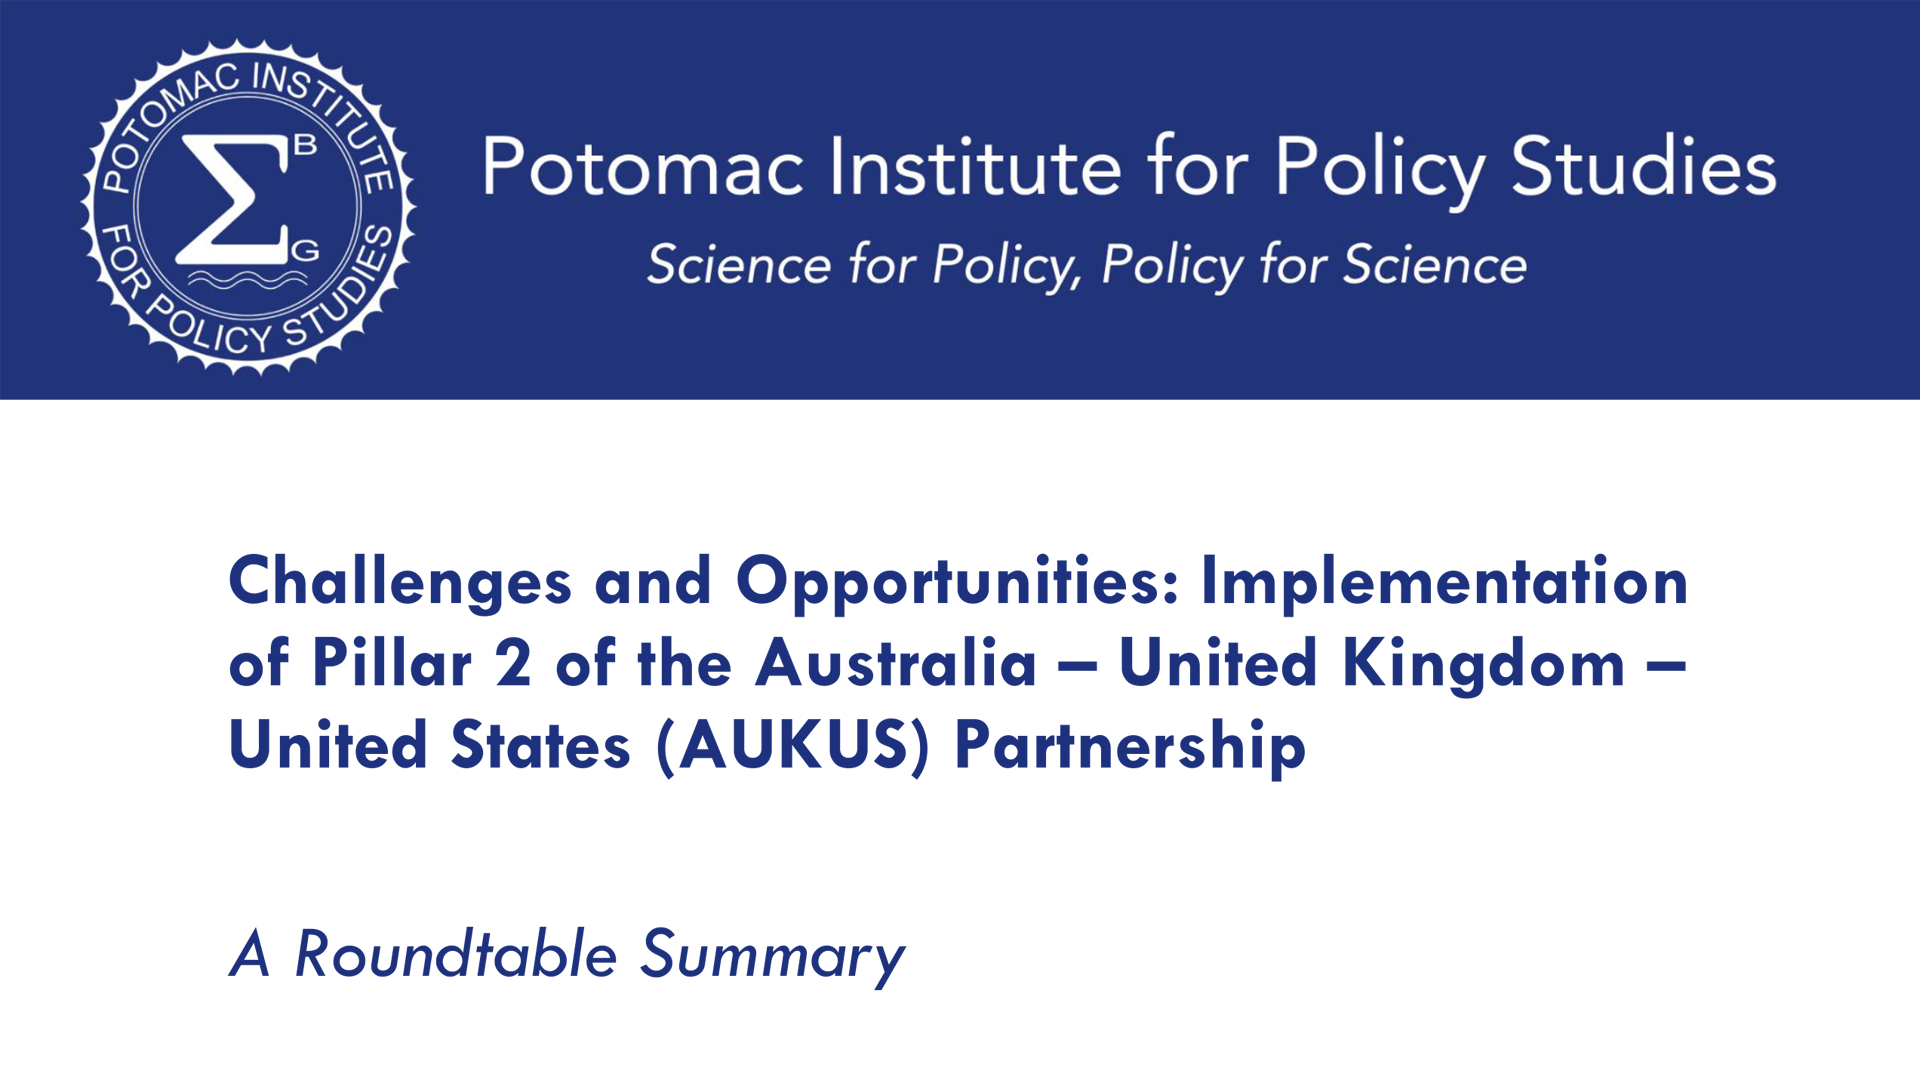 Challenges and Opportunities: Implementation of Pillar 2 of the Australia – United Kingdom – United States (AUKUS) Partnership